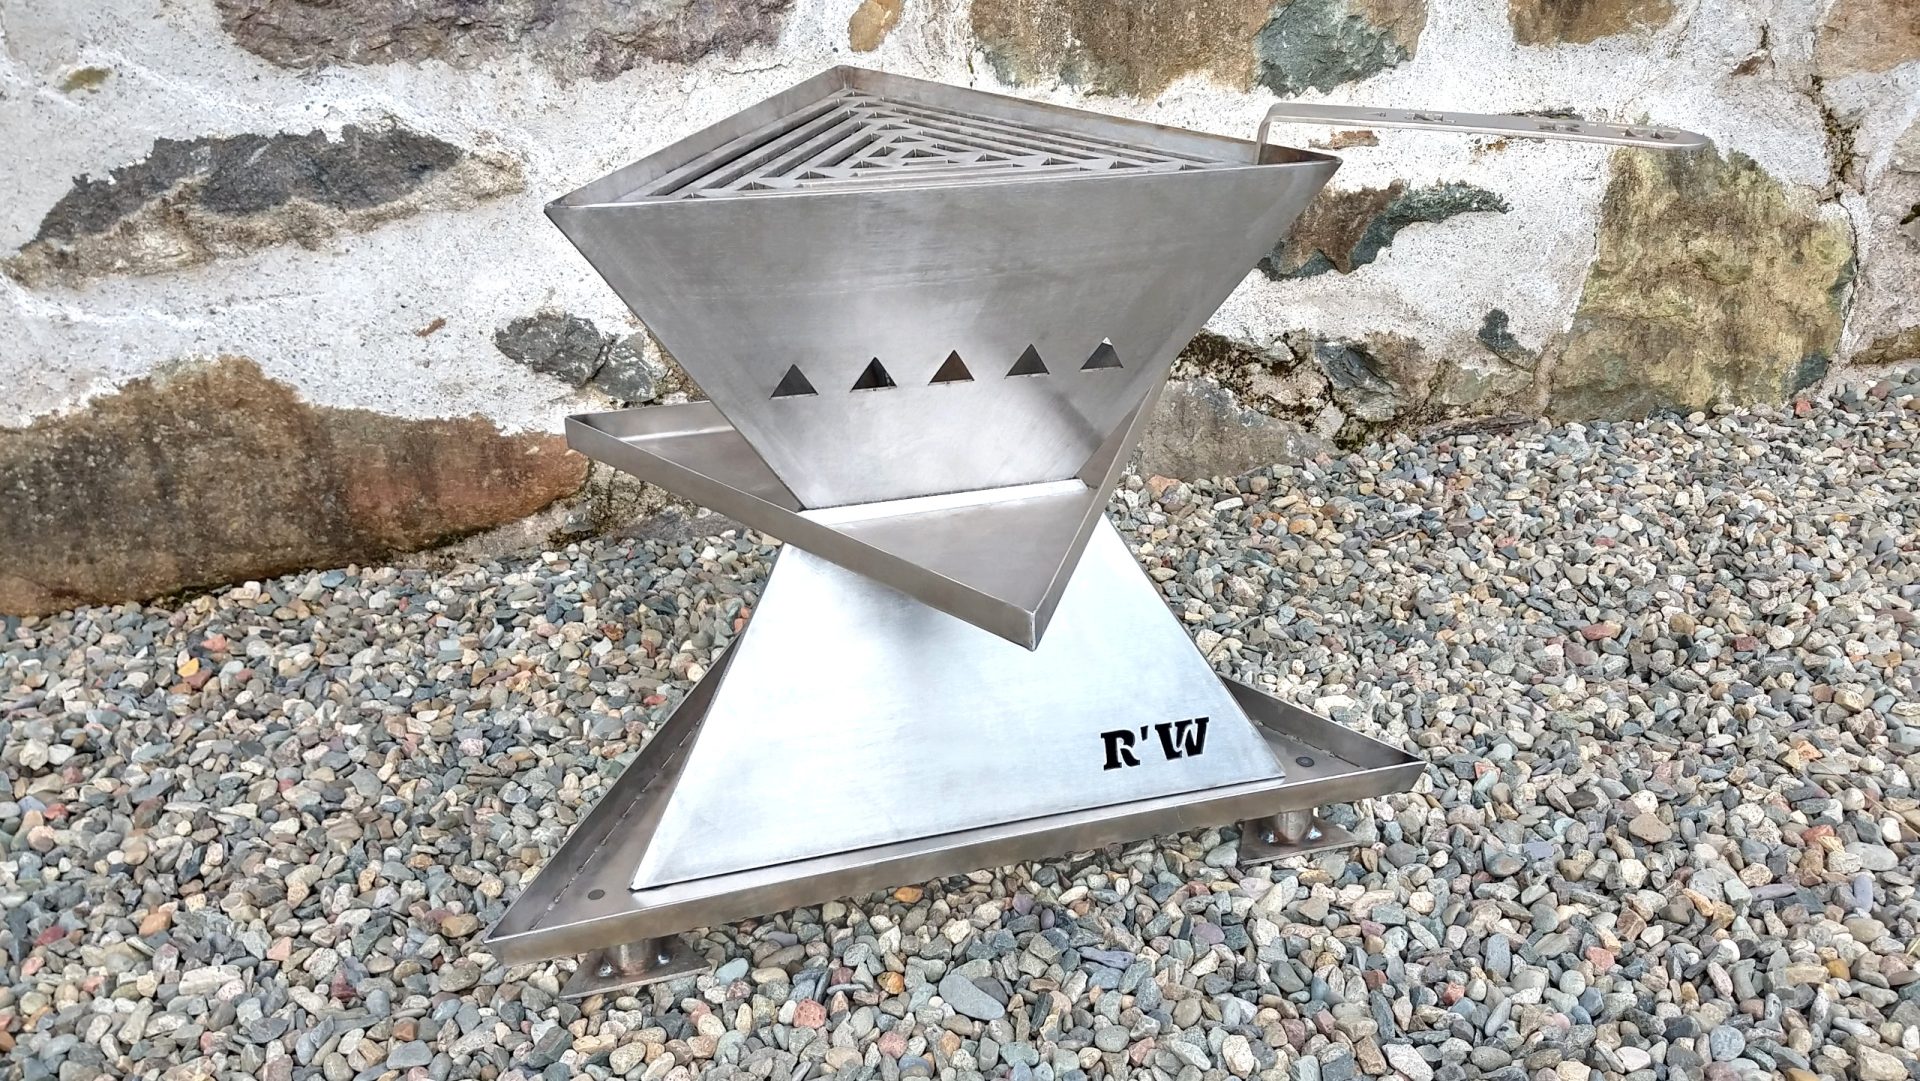 The latest TetraflameXL Fire Pit SizzleChef BBQ with Ash Catcher and Ground Guard in bare steel